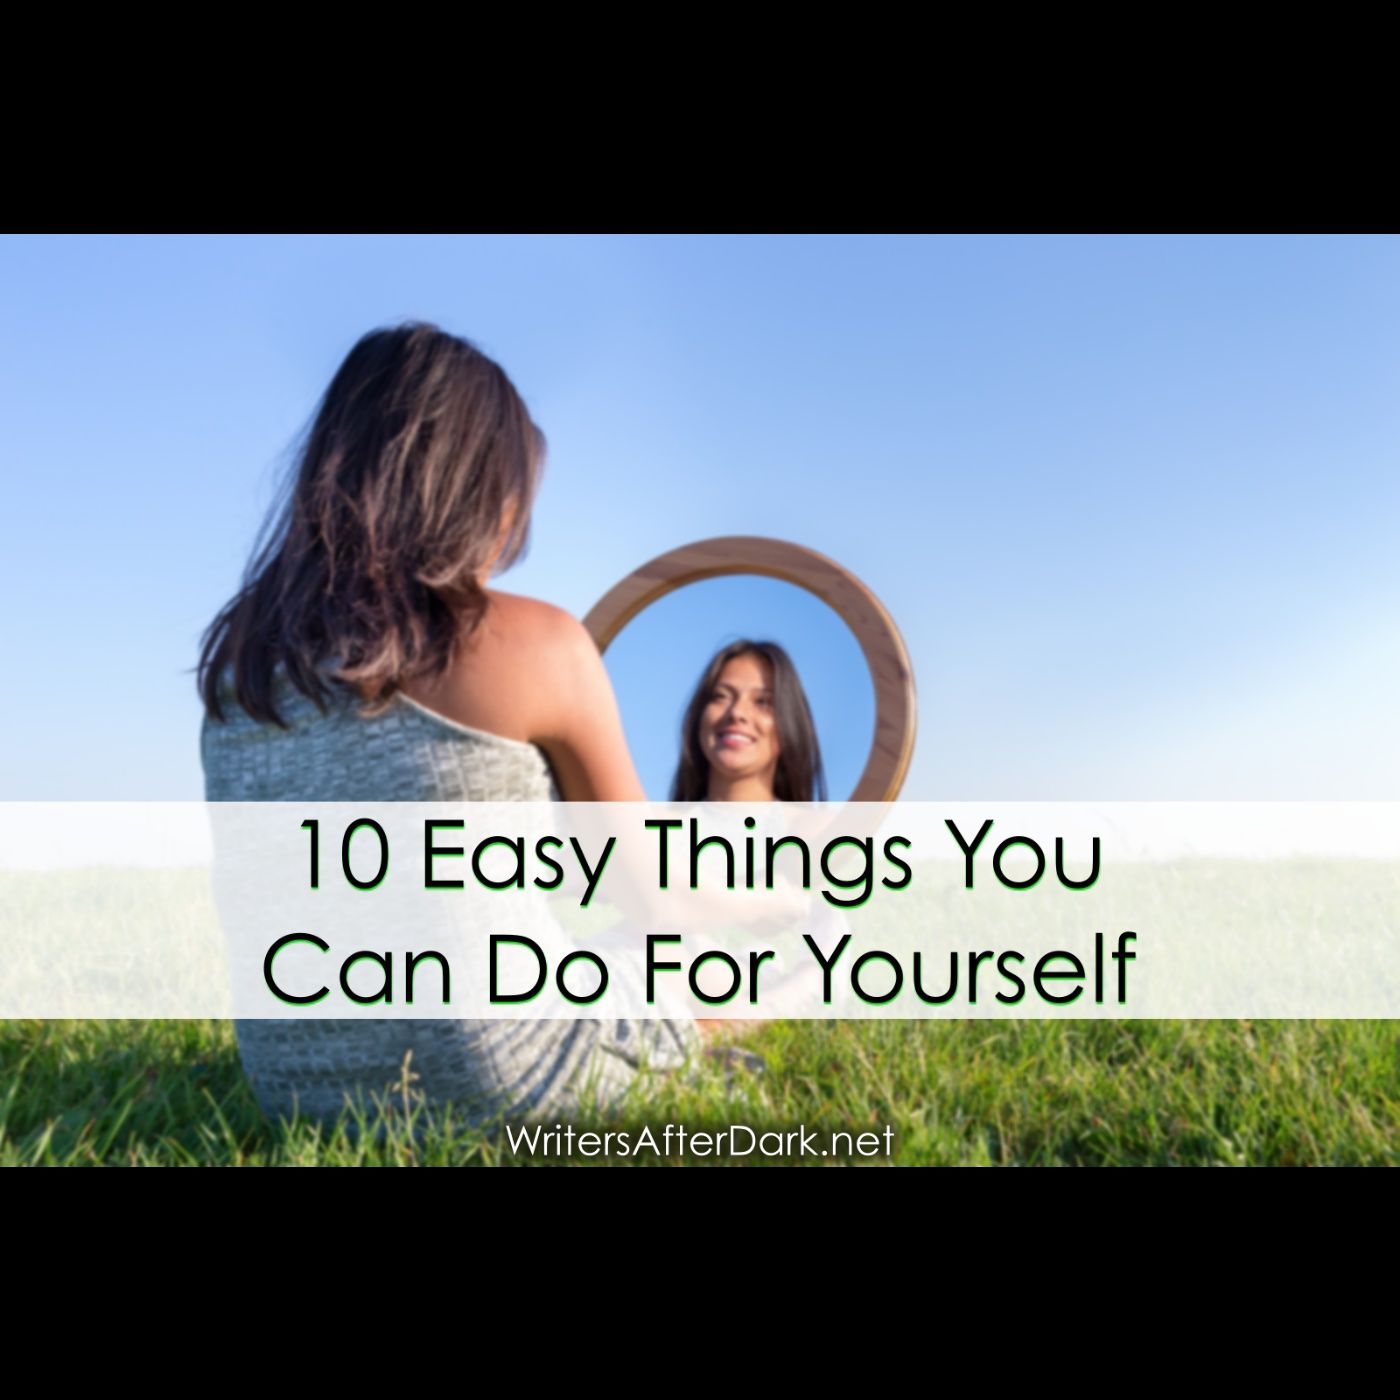 10 Easy Things You Can Do for Yourself